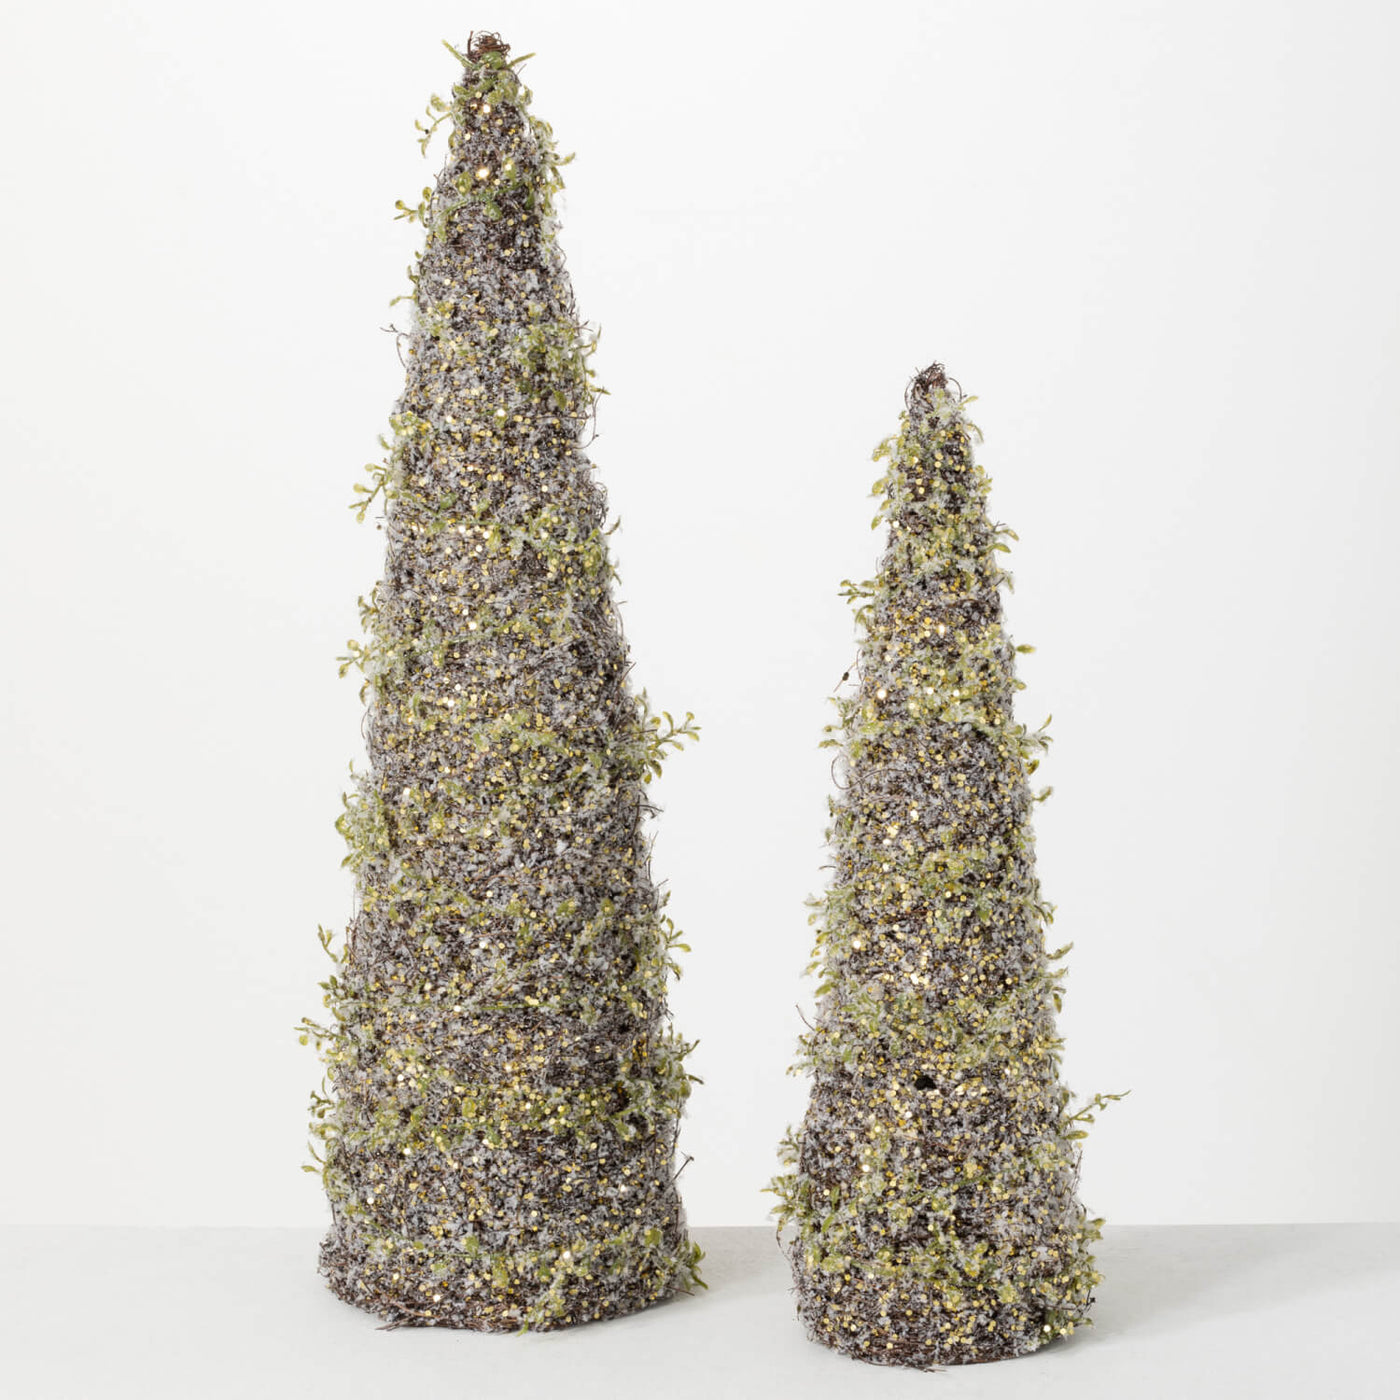 Pair of frosted twig cone trees adorned with glitter and greenery